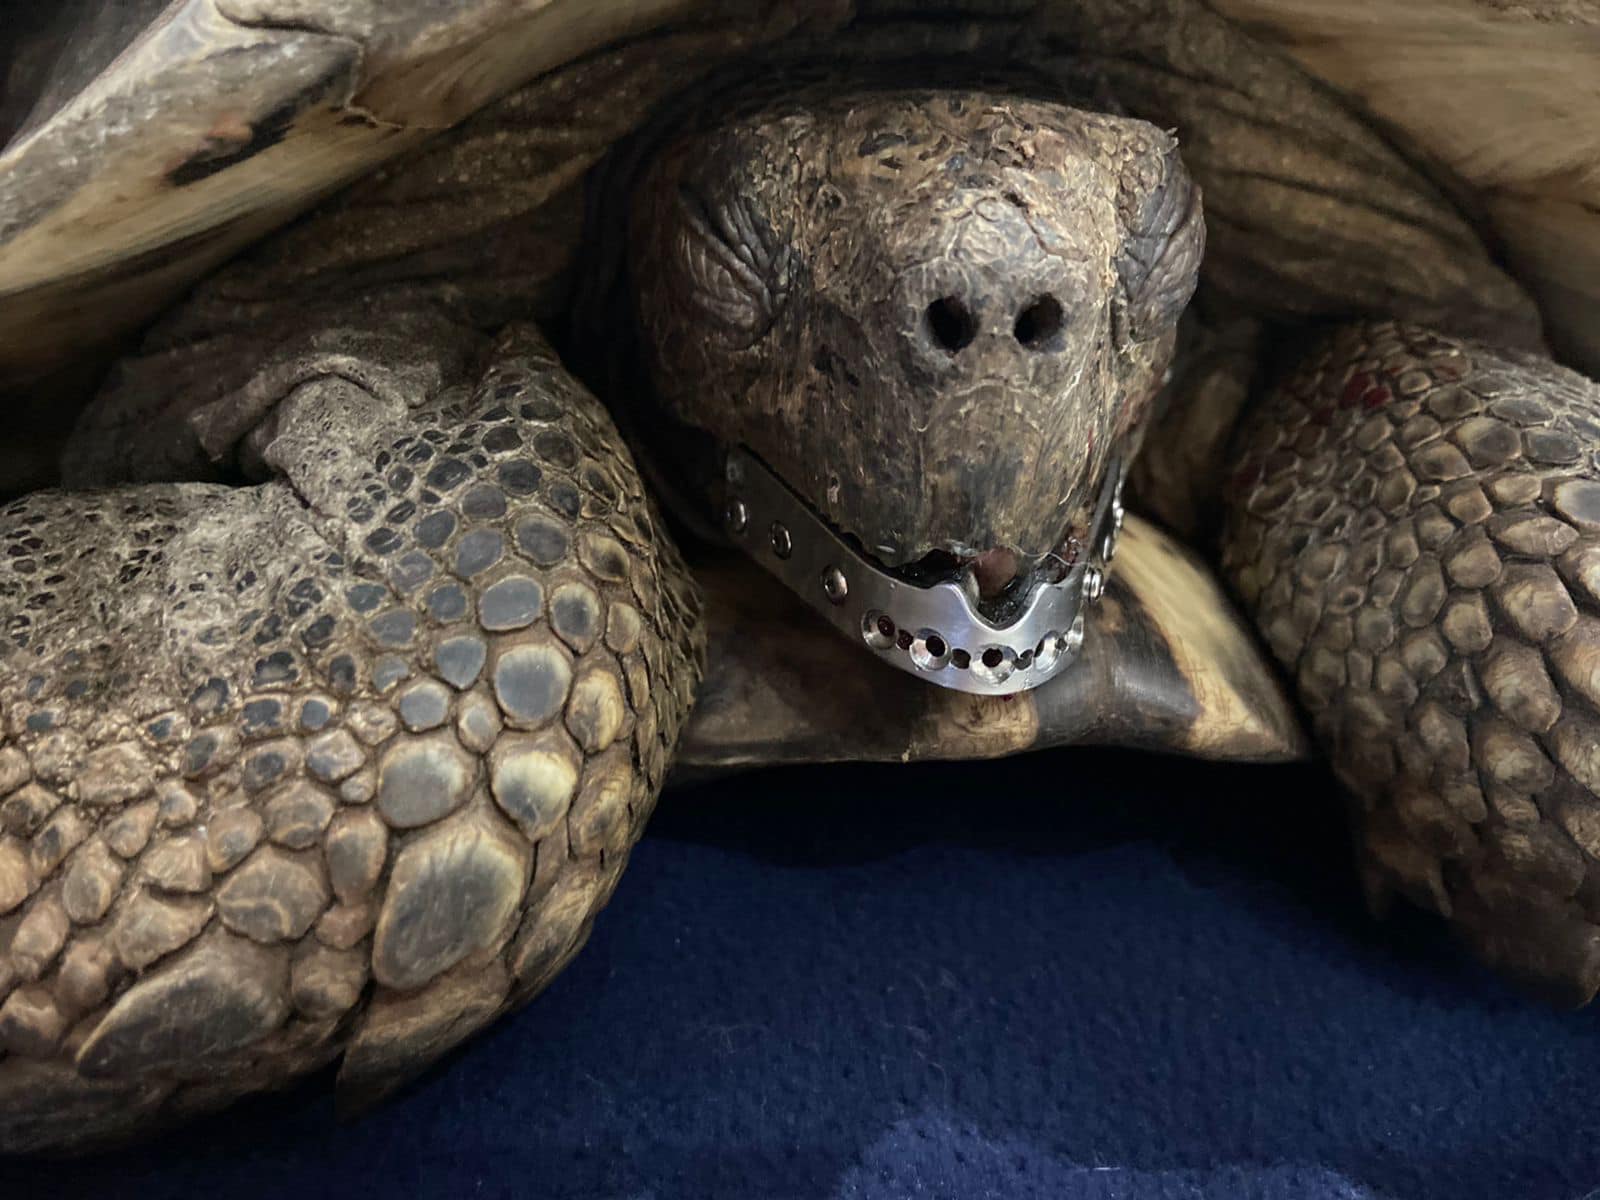 Vet Rebuilds Jaw of 30-Year-Old Tortoise with 3D Printer in South Africa